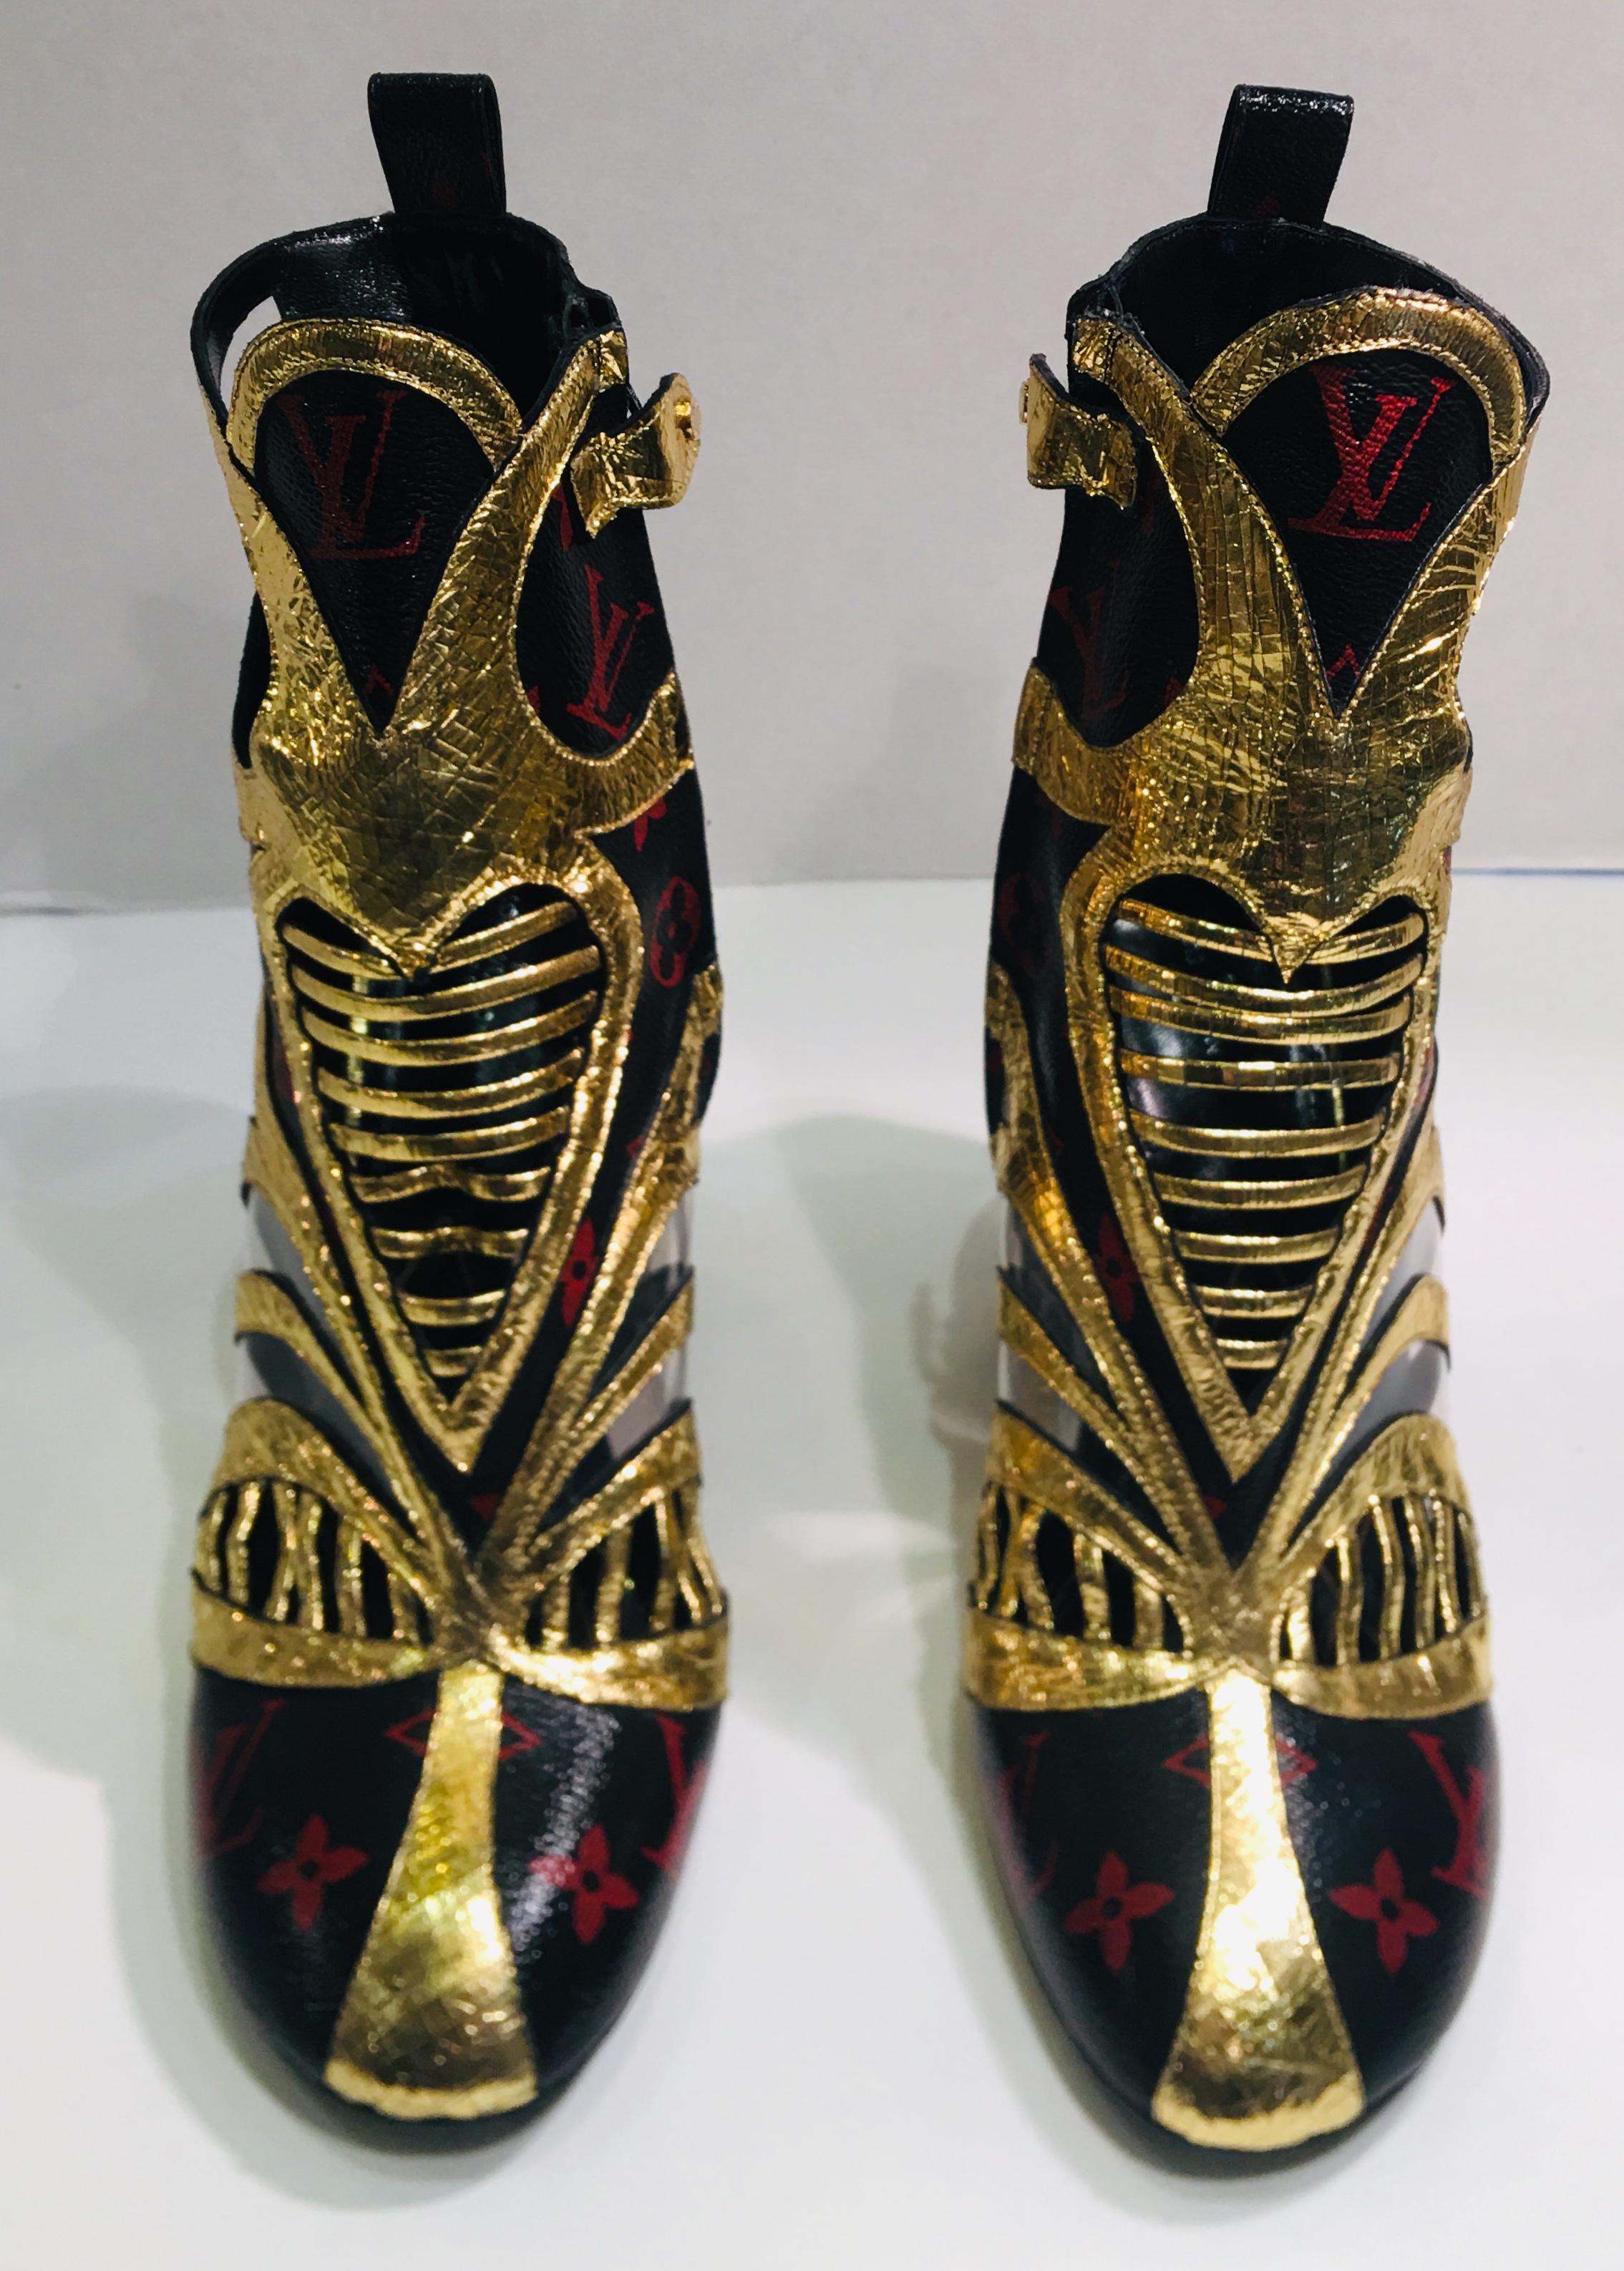 Louis Vuitton High Heels Red Bottoms - 2 For Sale on 1stDibs